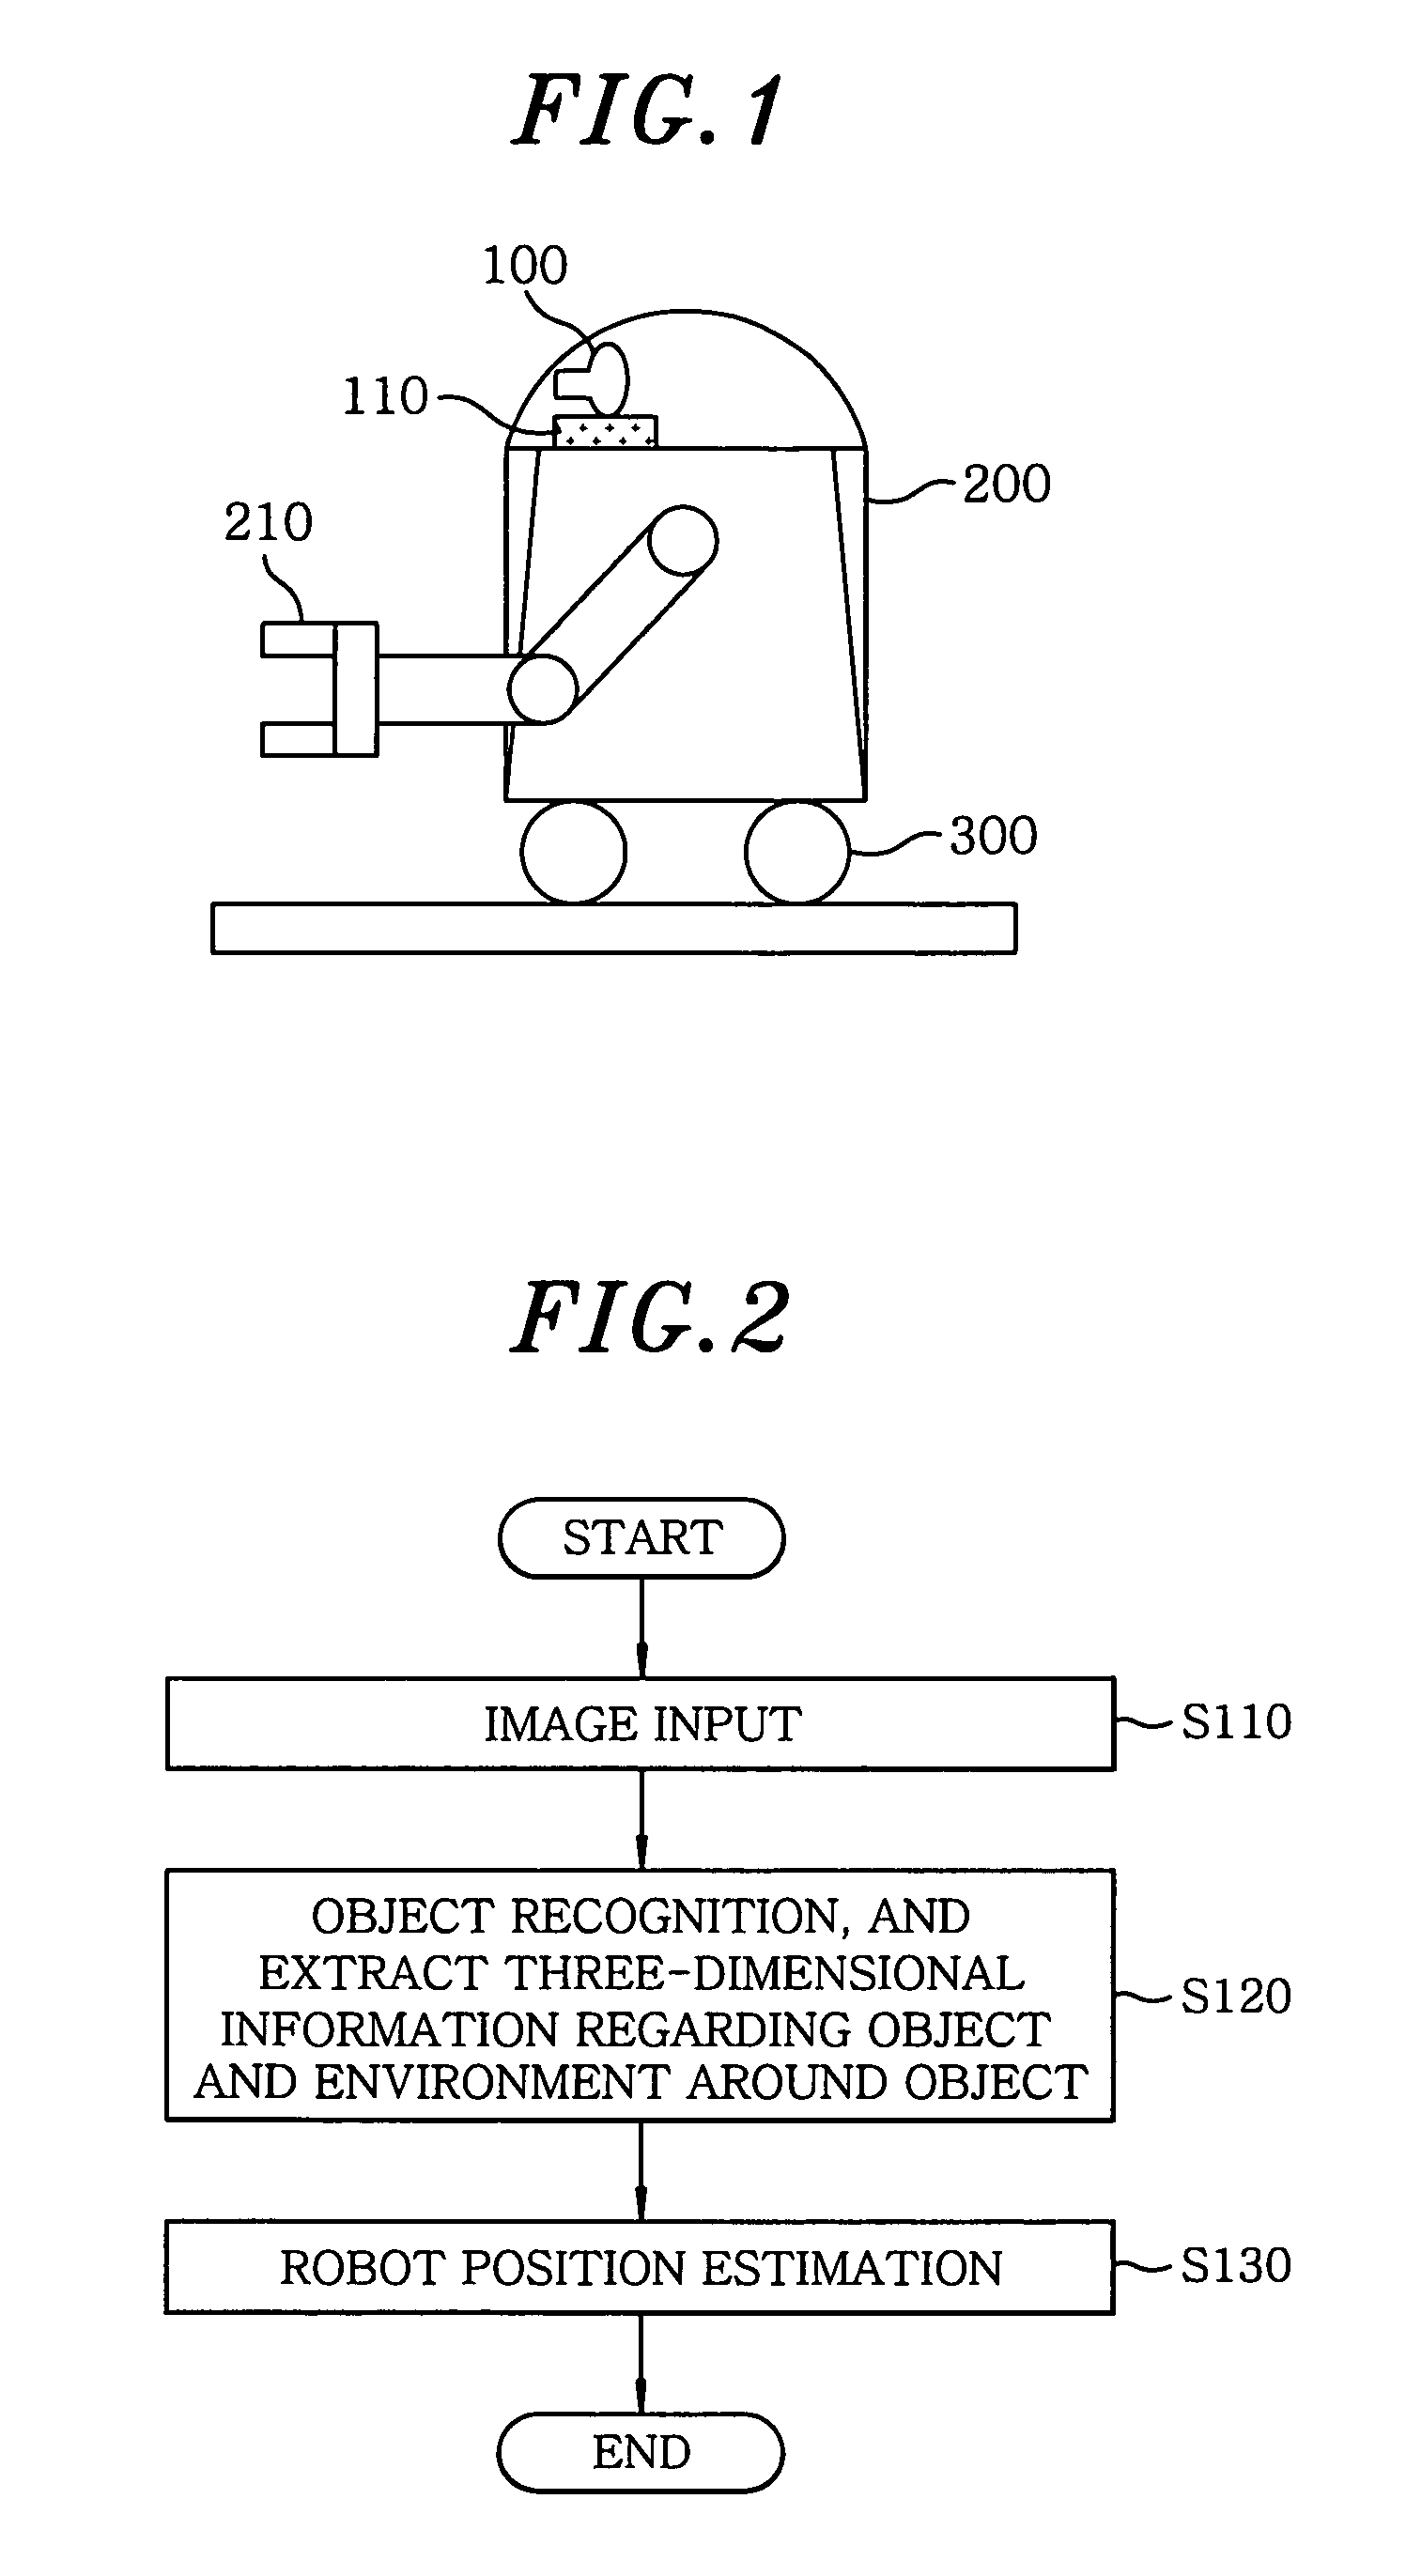 Method for self-localization of robot based on object recognition and environment information around recognized object